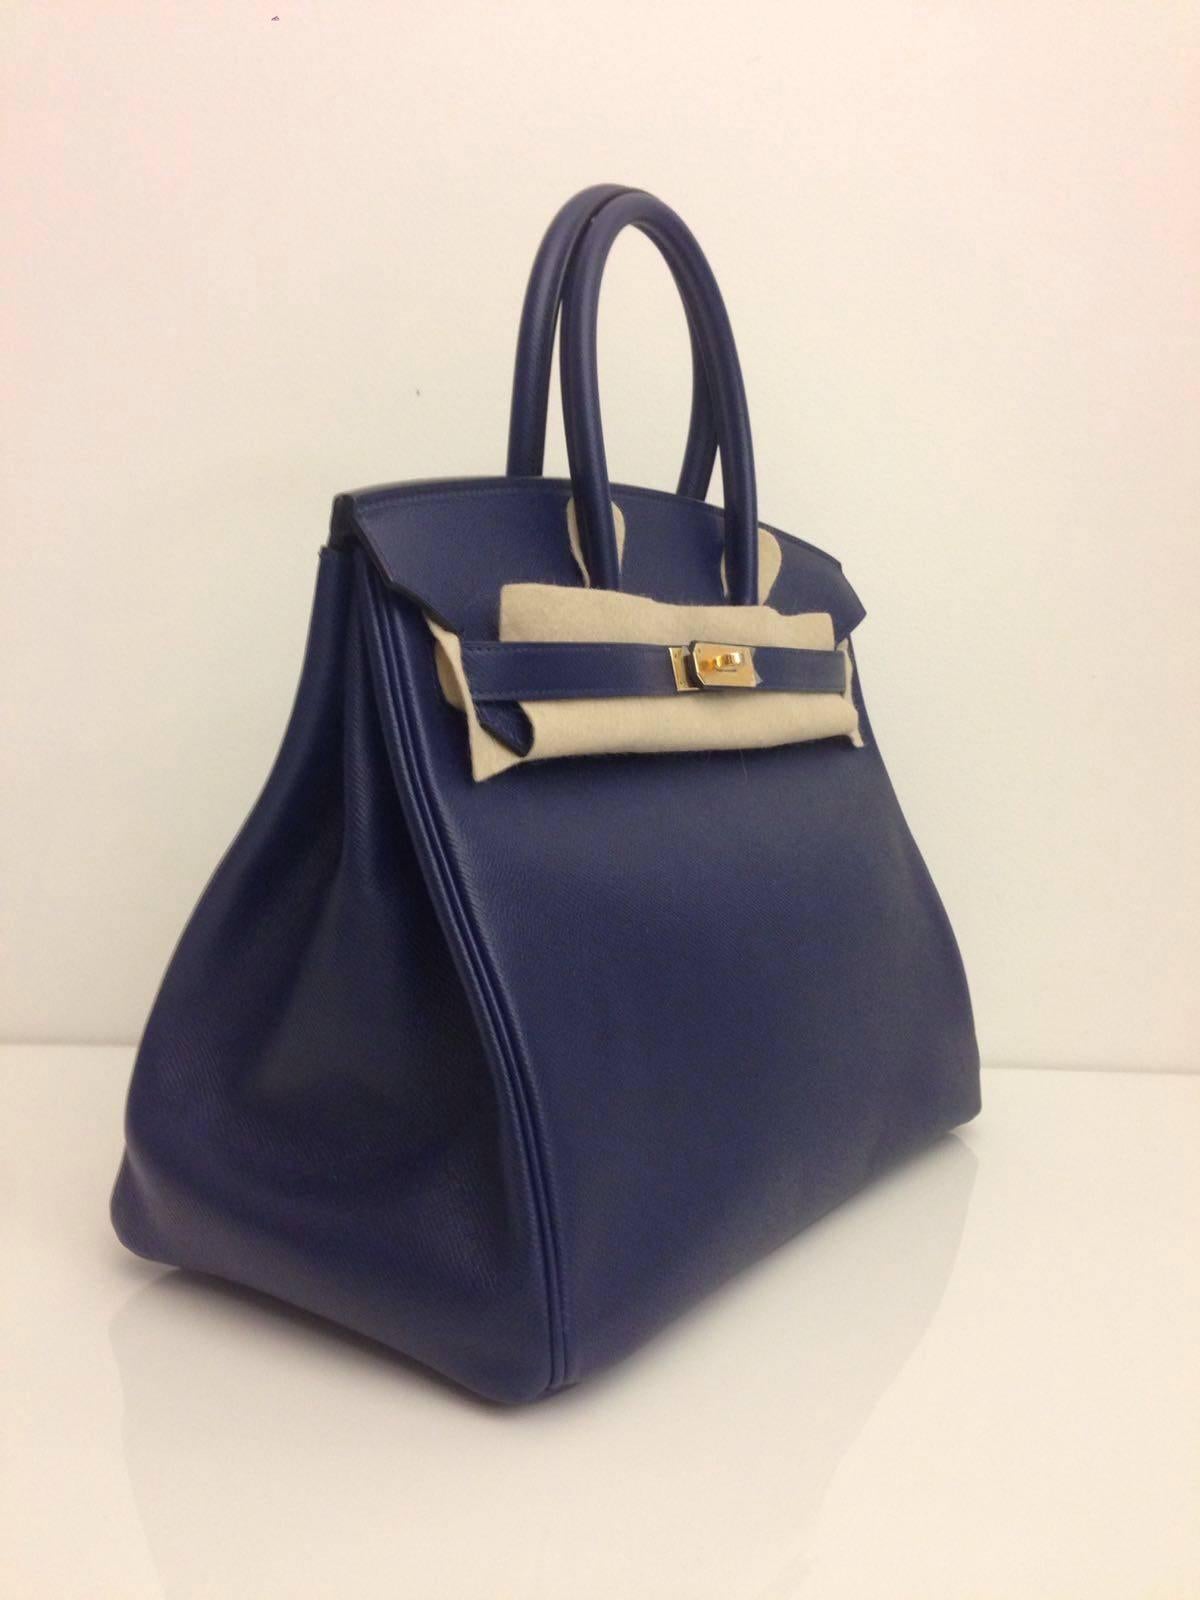 Hermes 
Birkin Size 35
Epsom leather 
Colour Blue Sapphire
gold hardware 
store fresh, comes with receipt and full set (dust bag, box...) 
Hydeparkfashion specializes in sourcing and delivering authentic luxury handbags, mainly Hermes, to